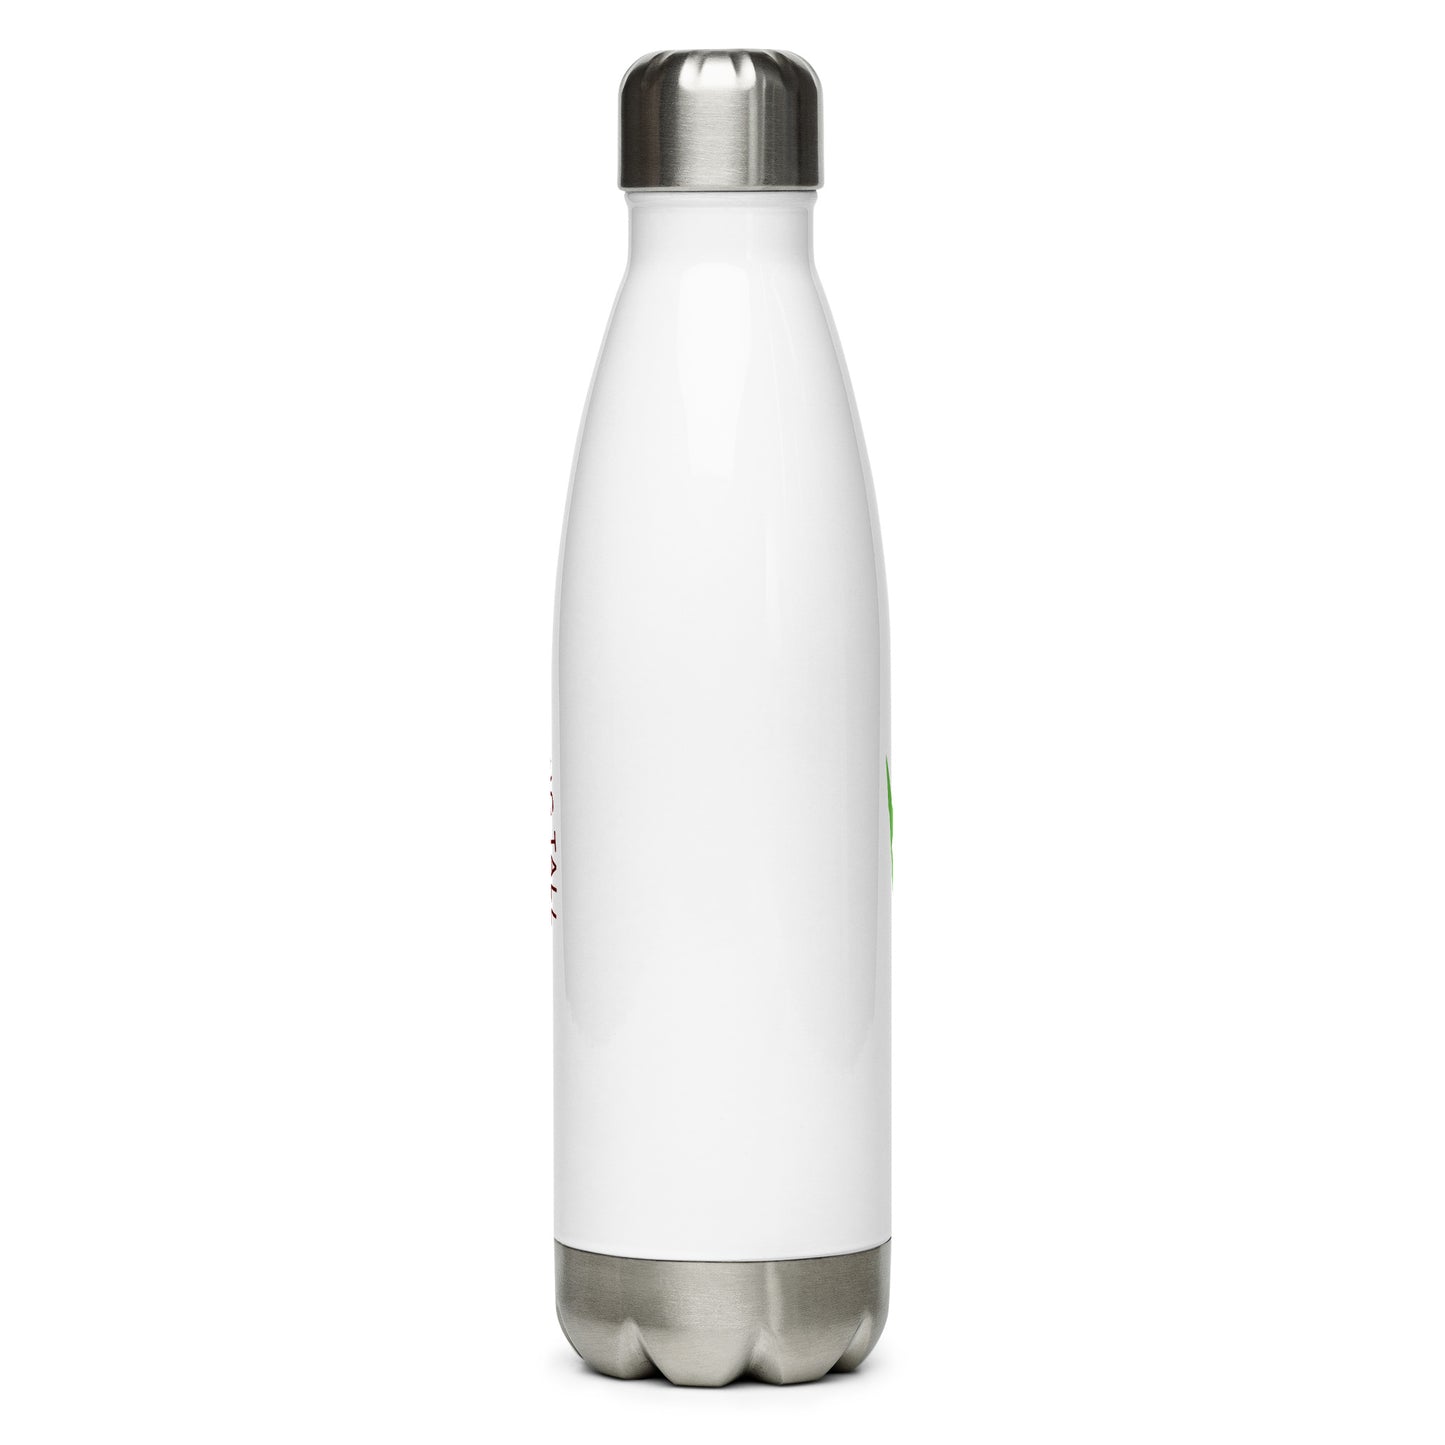 Sanibel Strong Standing Tall Stainless Steel Water Bottle